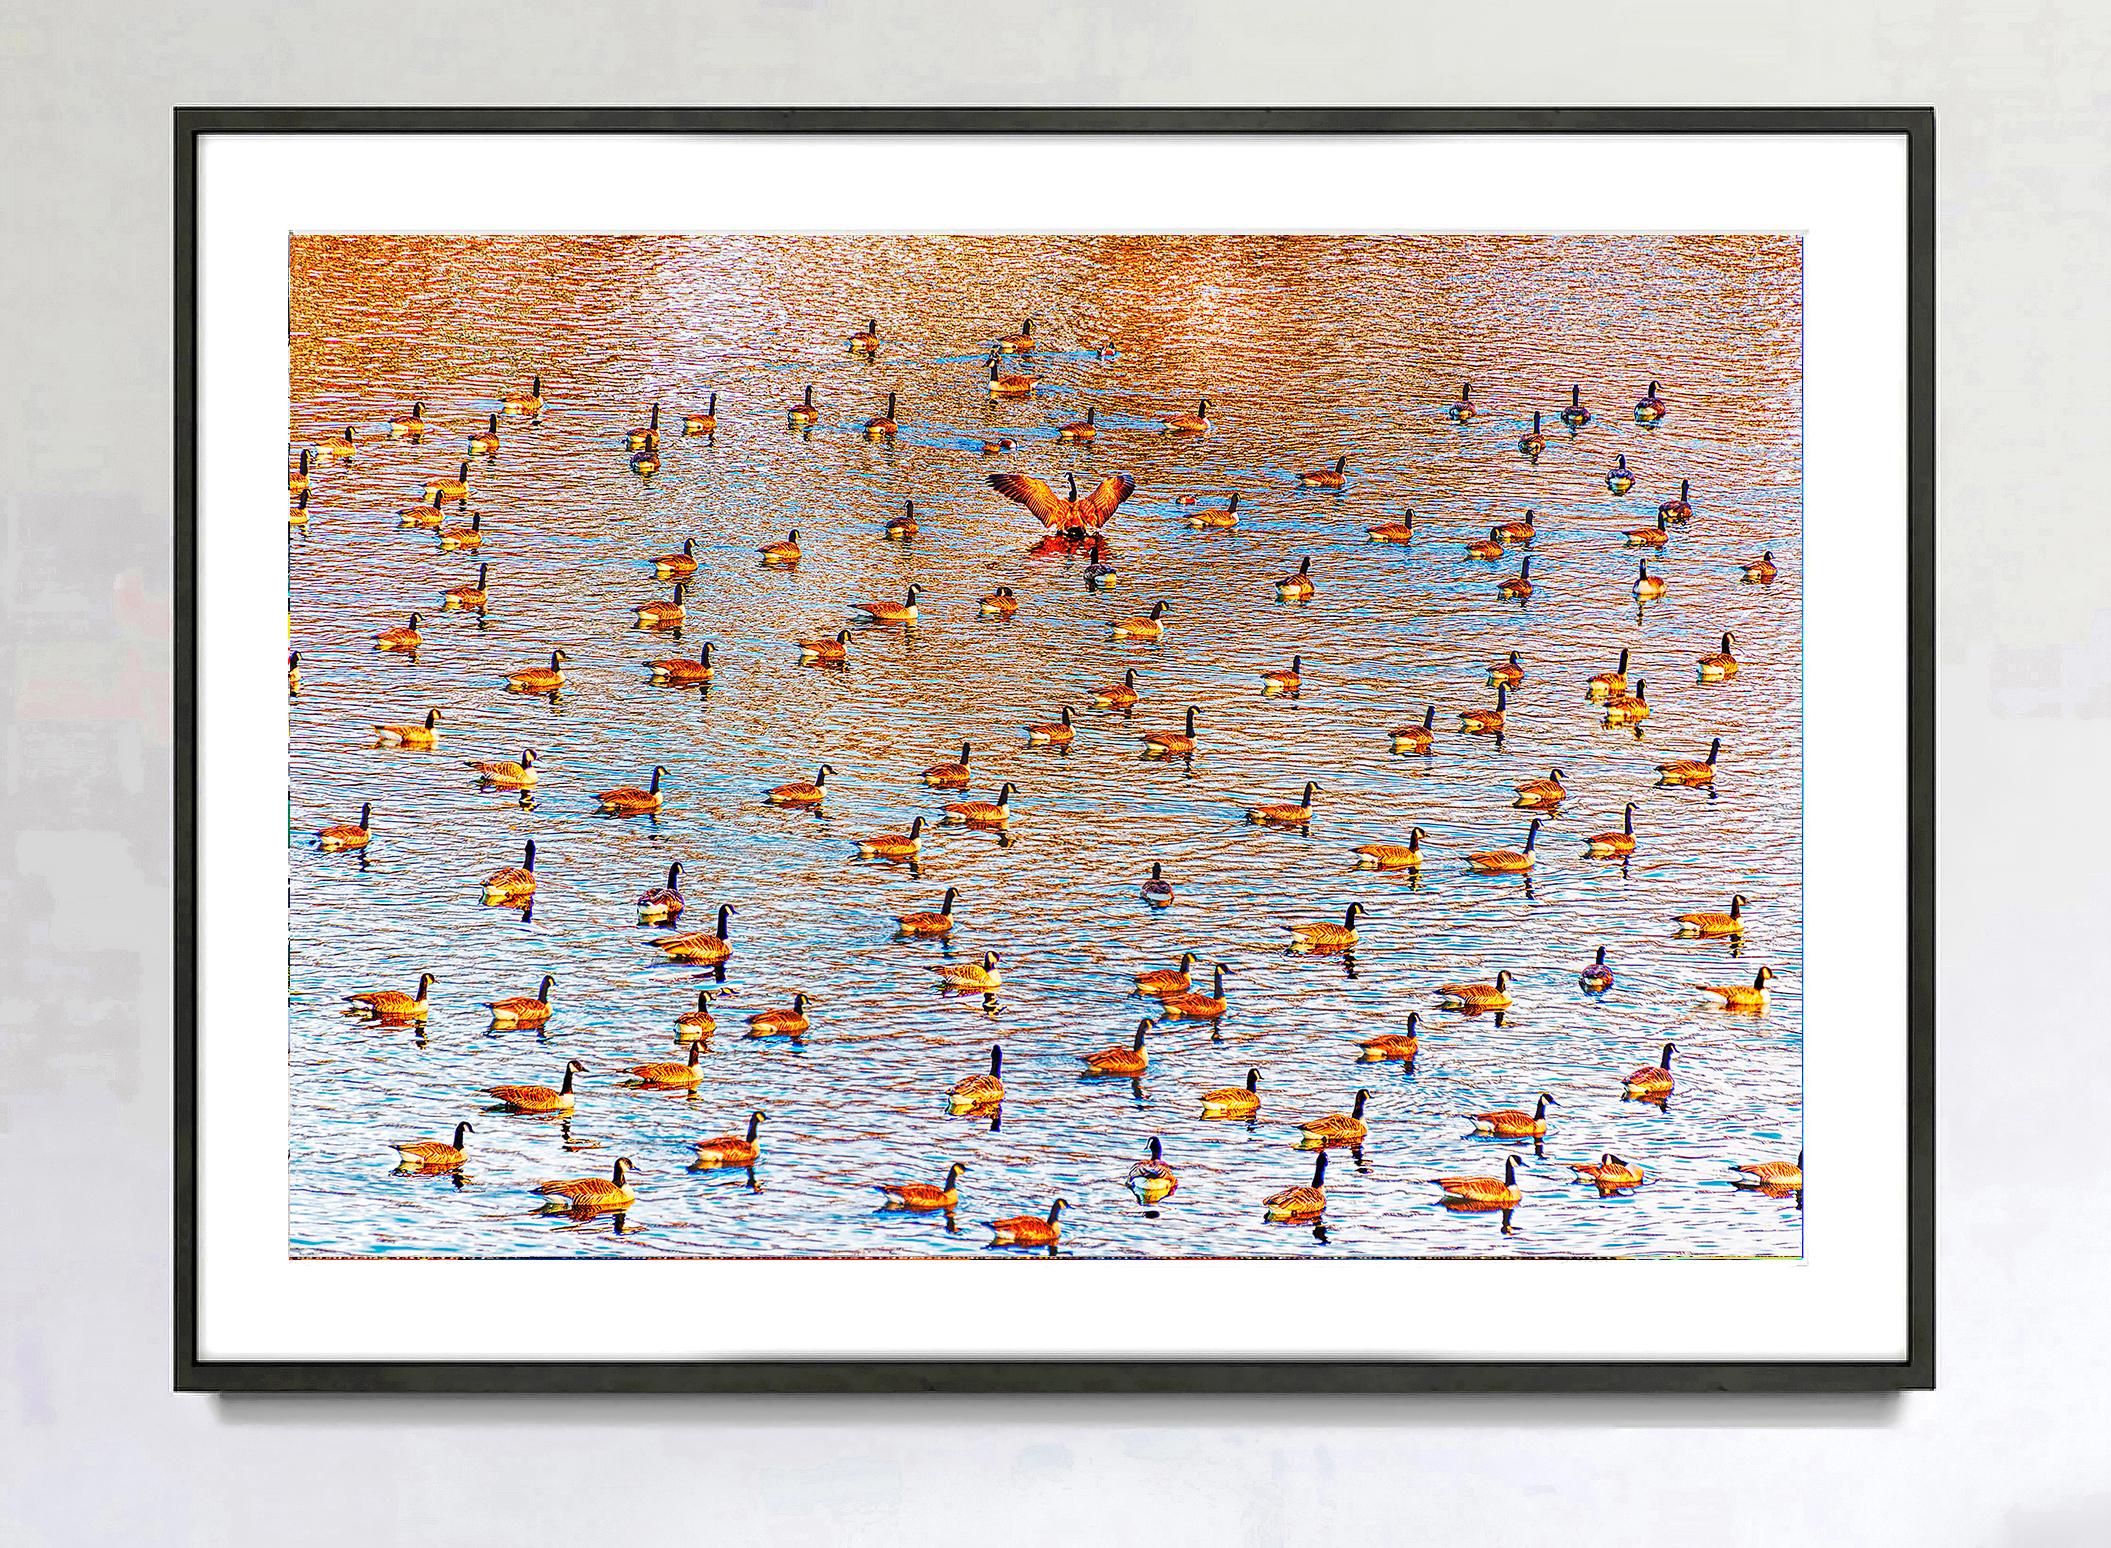 Ducks float on a cinnamon pond in loose formation, forming an overall pattern.  Their arrangement recalls the work of minimal artists of the 50s and 60s.  Yet, a single duck breaks ranks and turns the other way with extended wings, punctuating the